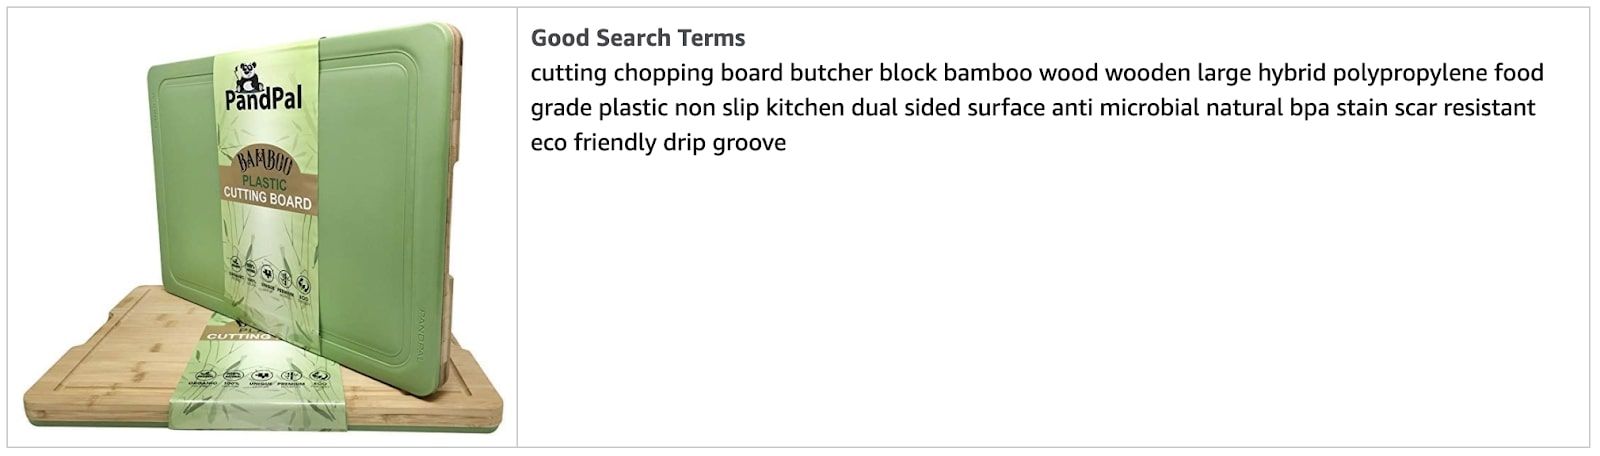 A good example of Amazon keywords tips of search terms shown by Amazon